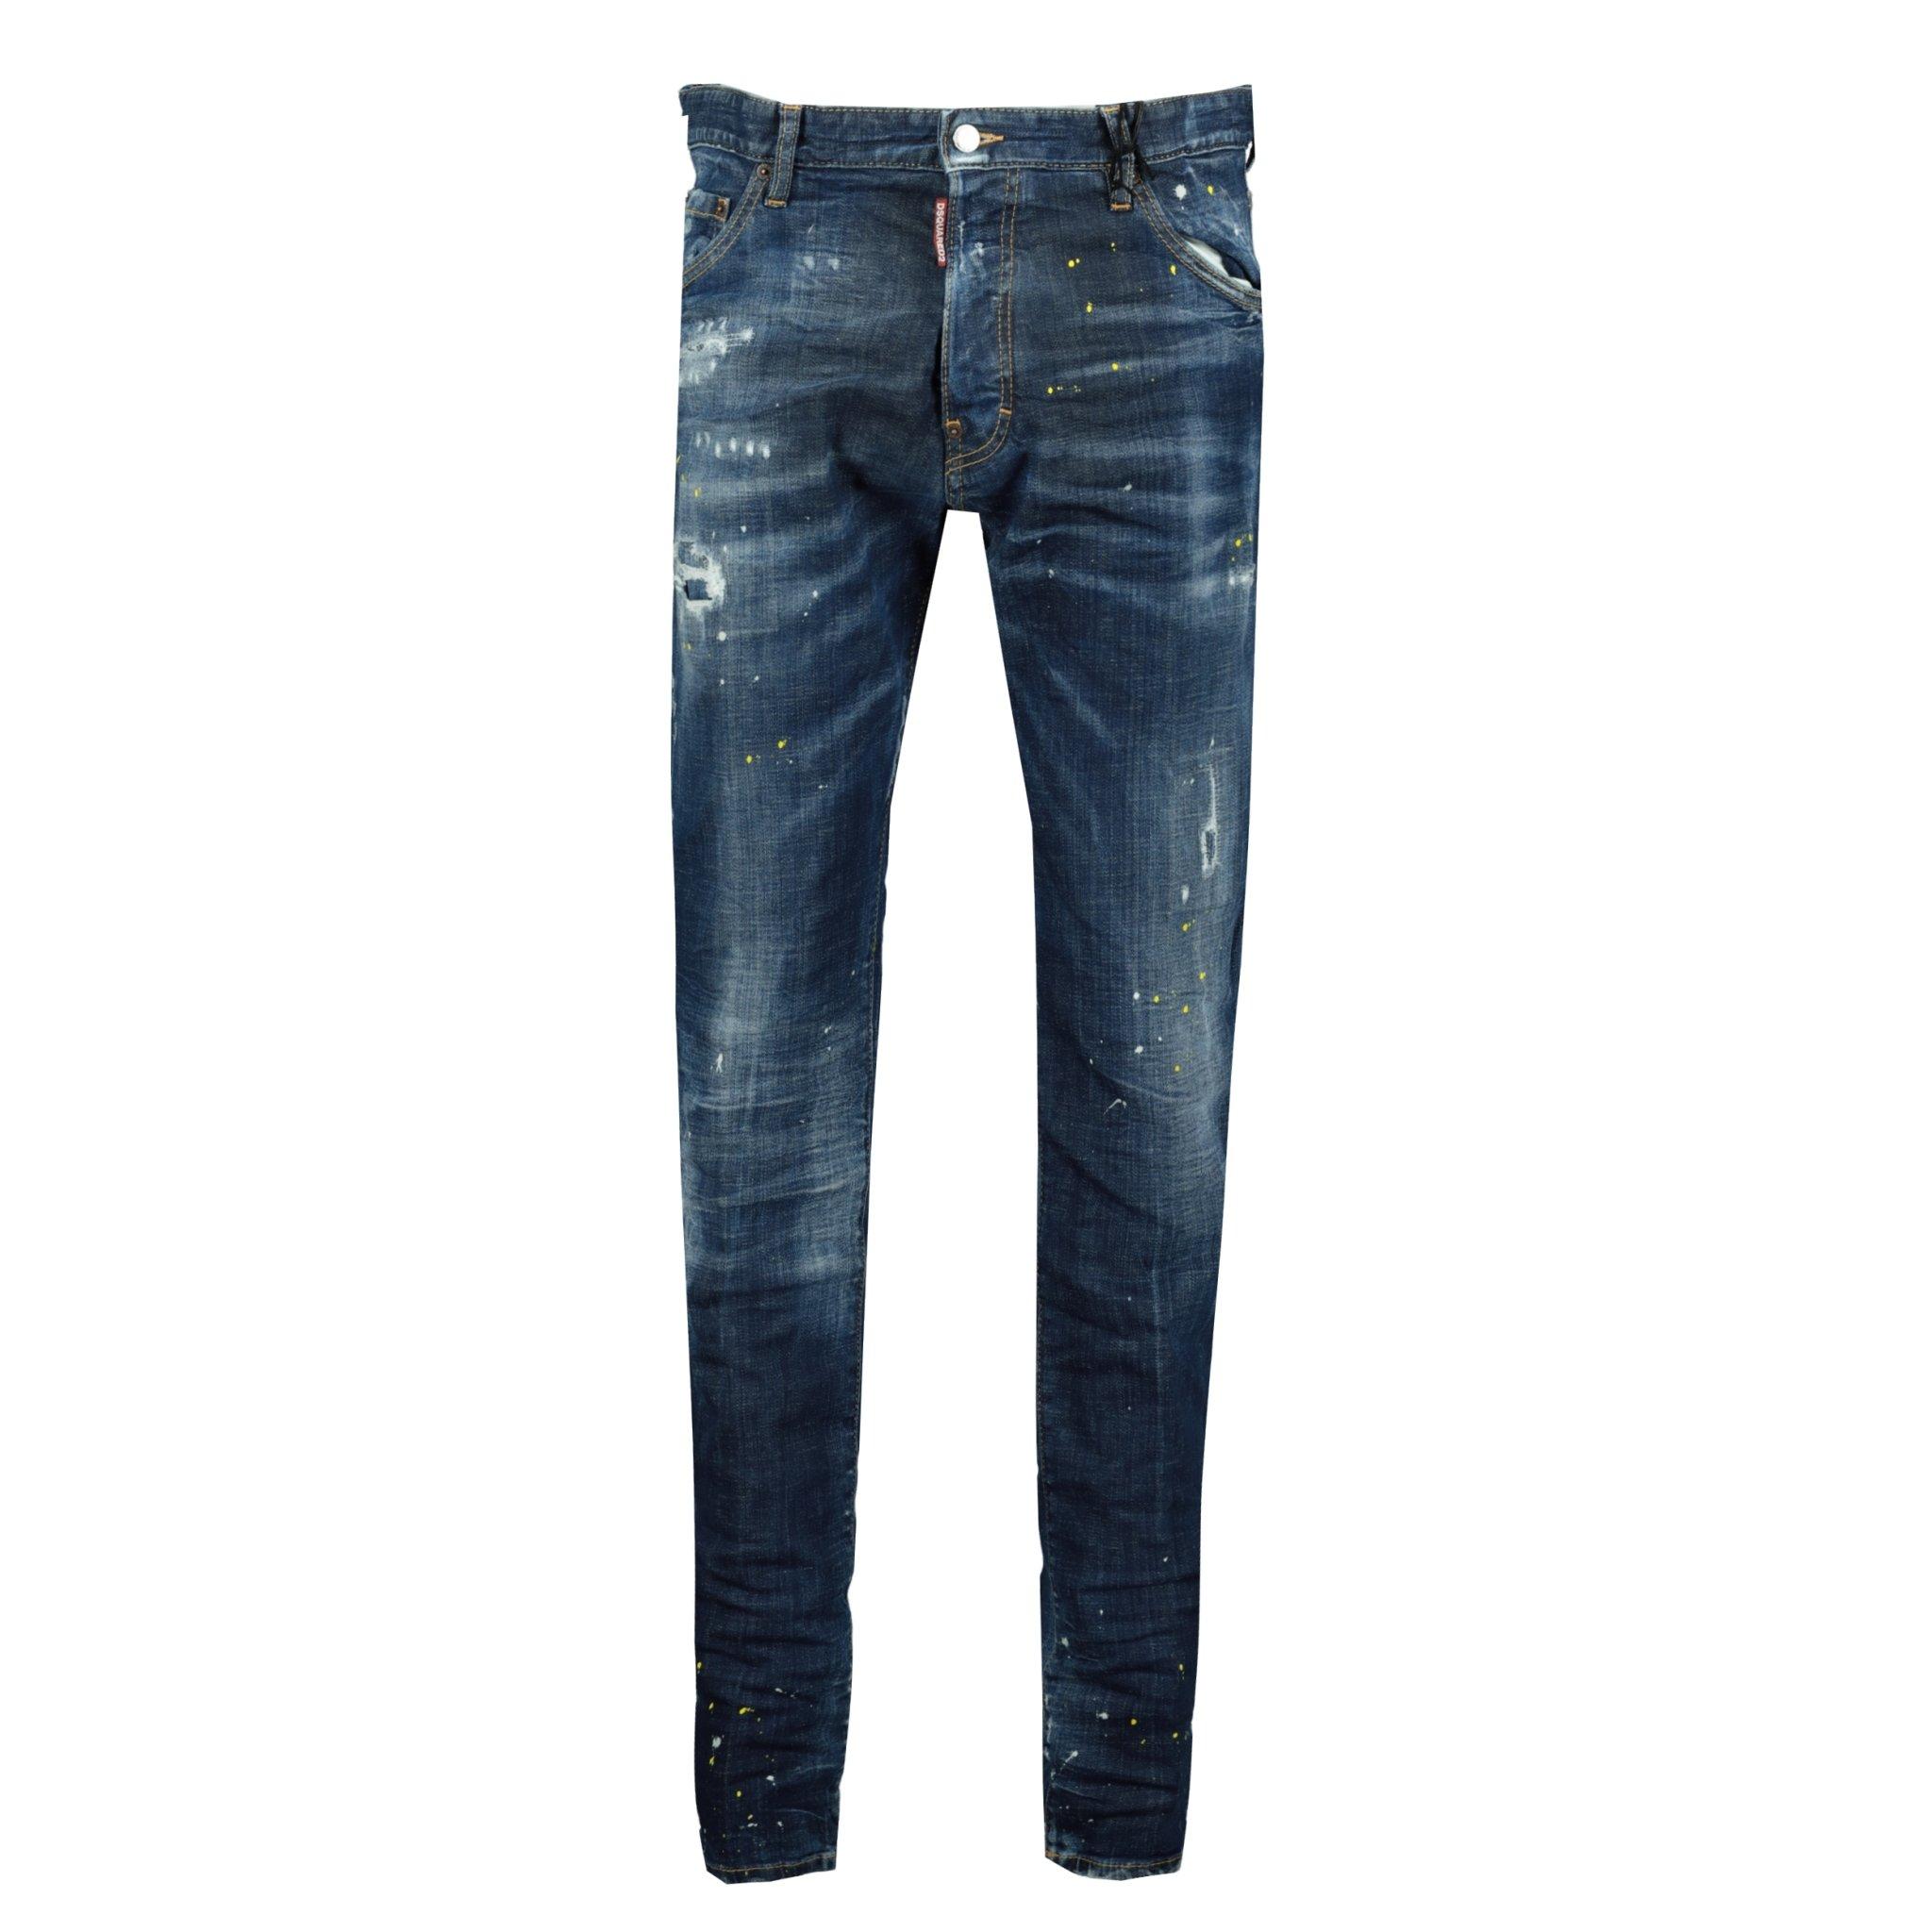 DSquared² Denim Cool Guy Yellow Paint Slim Fit Jeans in Blue for Men - Lyst